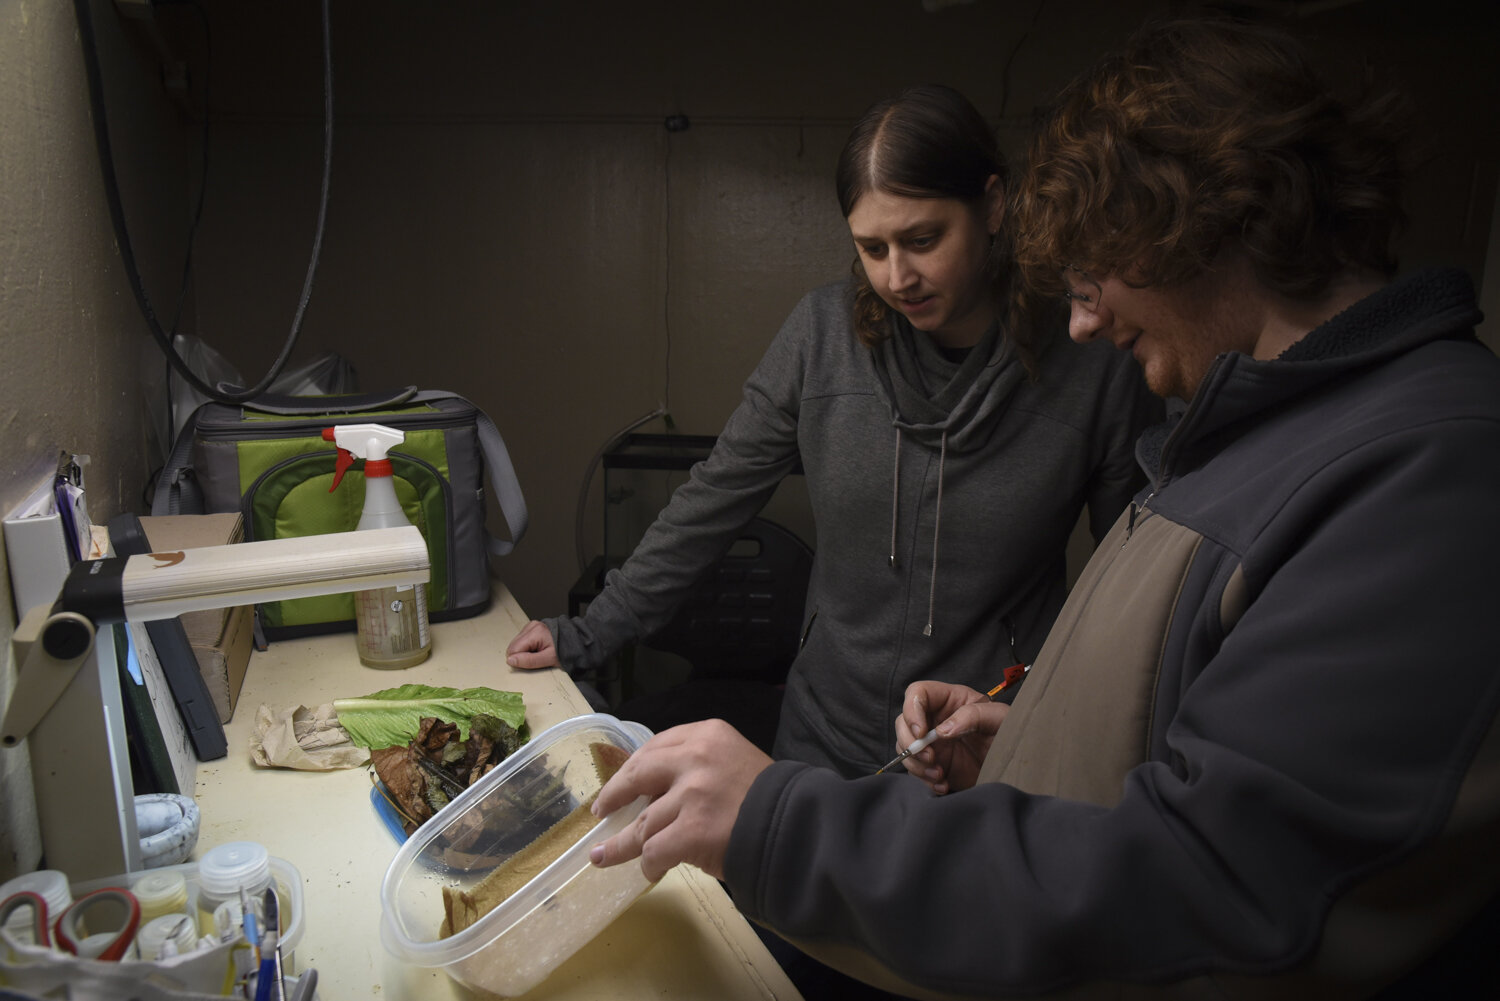  Cody Gilbertson and Ashton Yost discuss the snail population at the Rosamond Gifford Zoo in Syracuse, New York where part of the captive breeding snails are raised. 